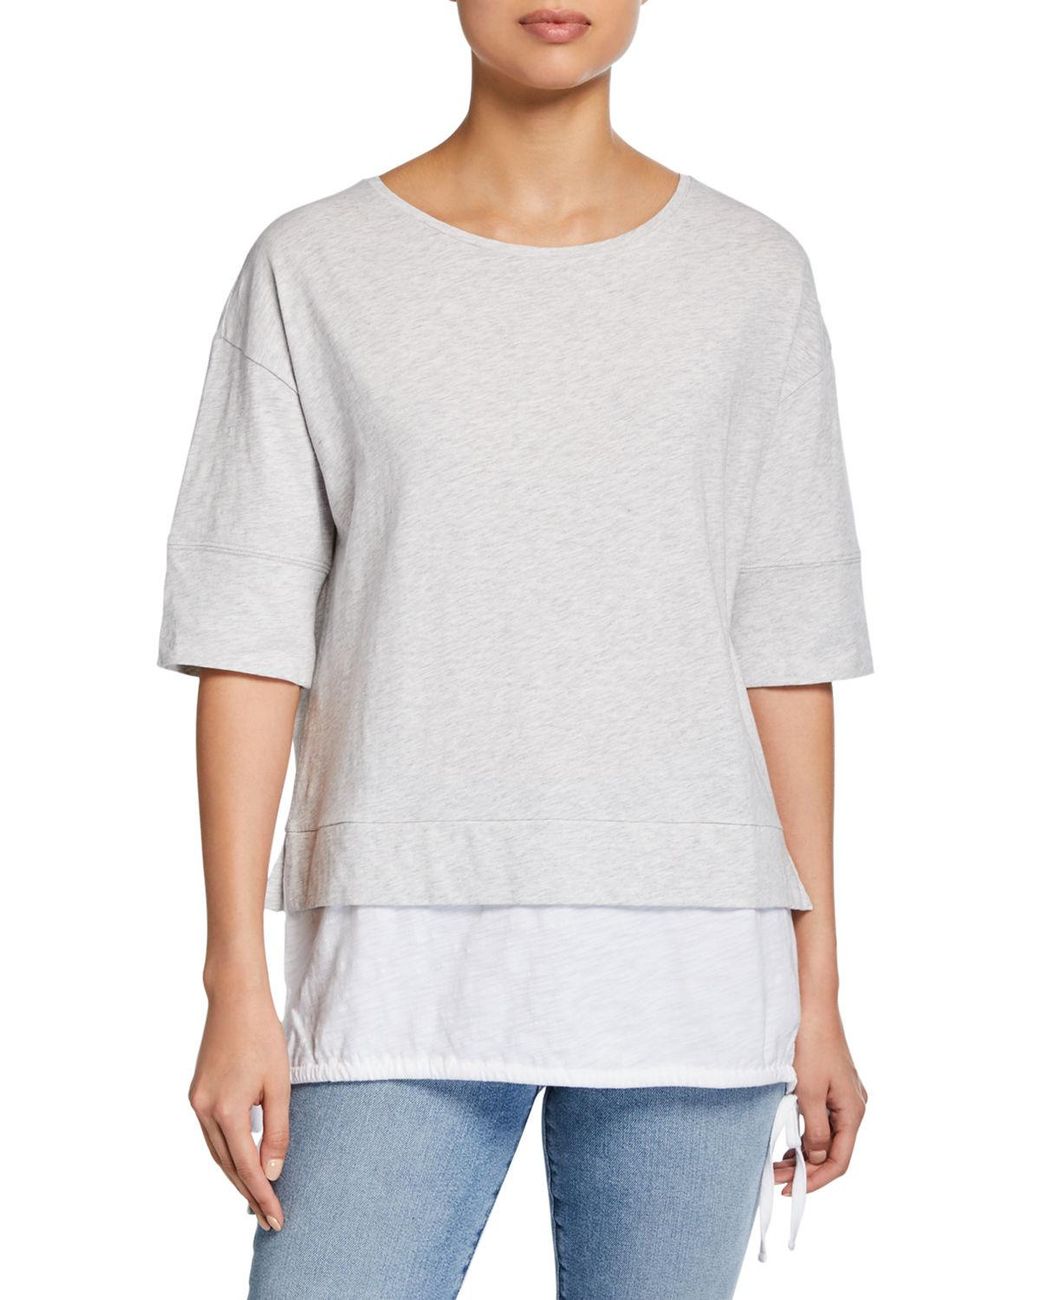 Lyst - Lisa Todd Plus Size Forever Young Slub Cotton Layer Tee W/ Side ...